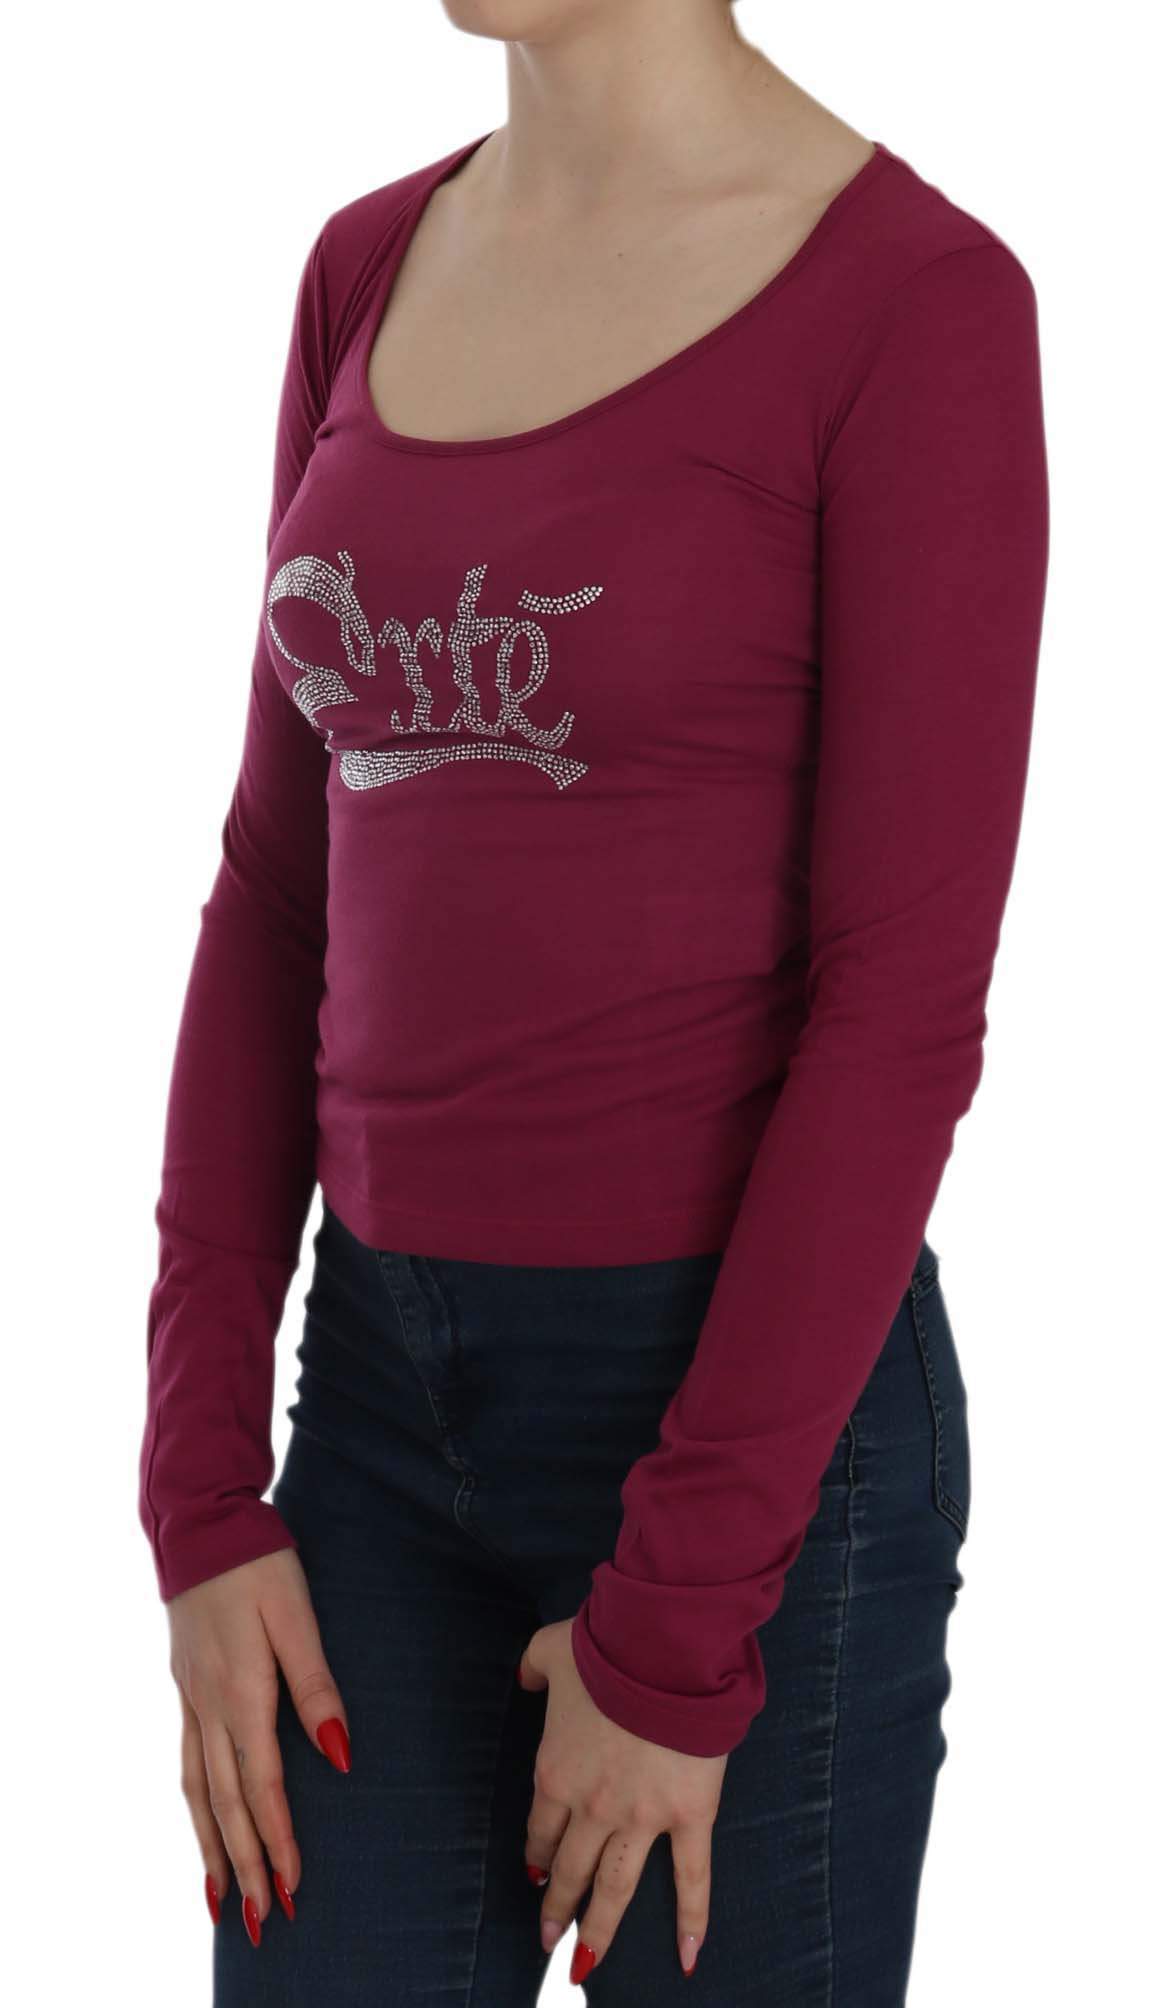 Exte Crystal Embellished Long Sleeve Casual Top #women, Catch, Exte, feed-agegroup-adult, feed-color-red, feed-gender-female, feed-size-IT38|XS, feed-size-IT40|S, feed-size-IT42|M, feed-size-IT44|L, feed-size-IT46|XL, Gender_Women, IT38|XS, IT40|S, IT42|M, IT44|L, IT46|XL, Kogan, Red, Tops & T-Shirts - Women - Clothing, Women - New Arrivals at SEYMAYKA